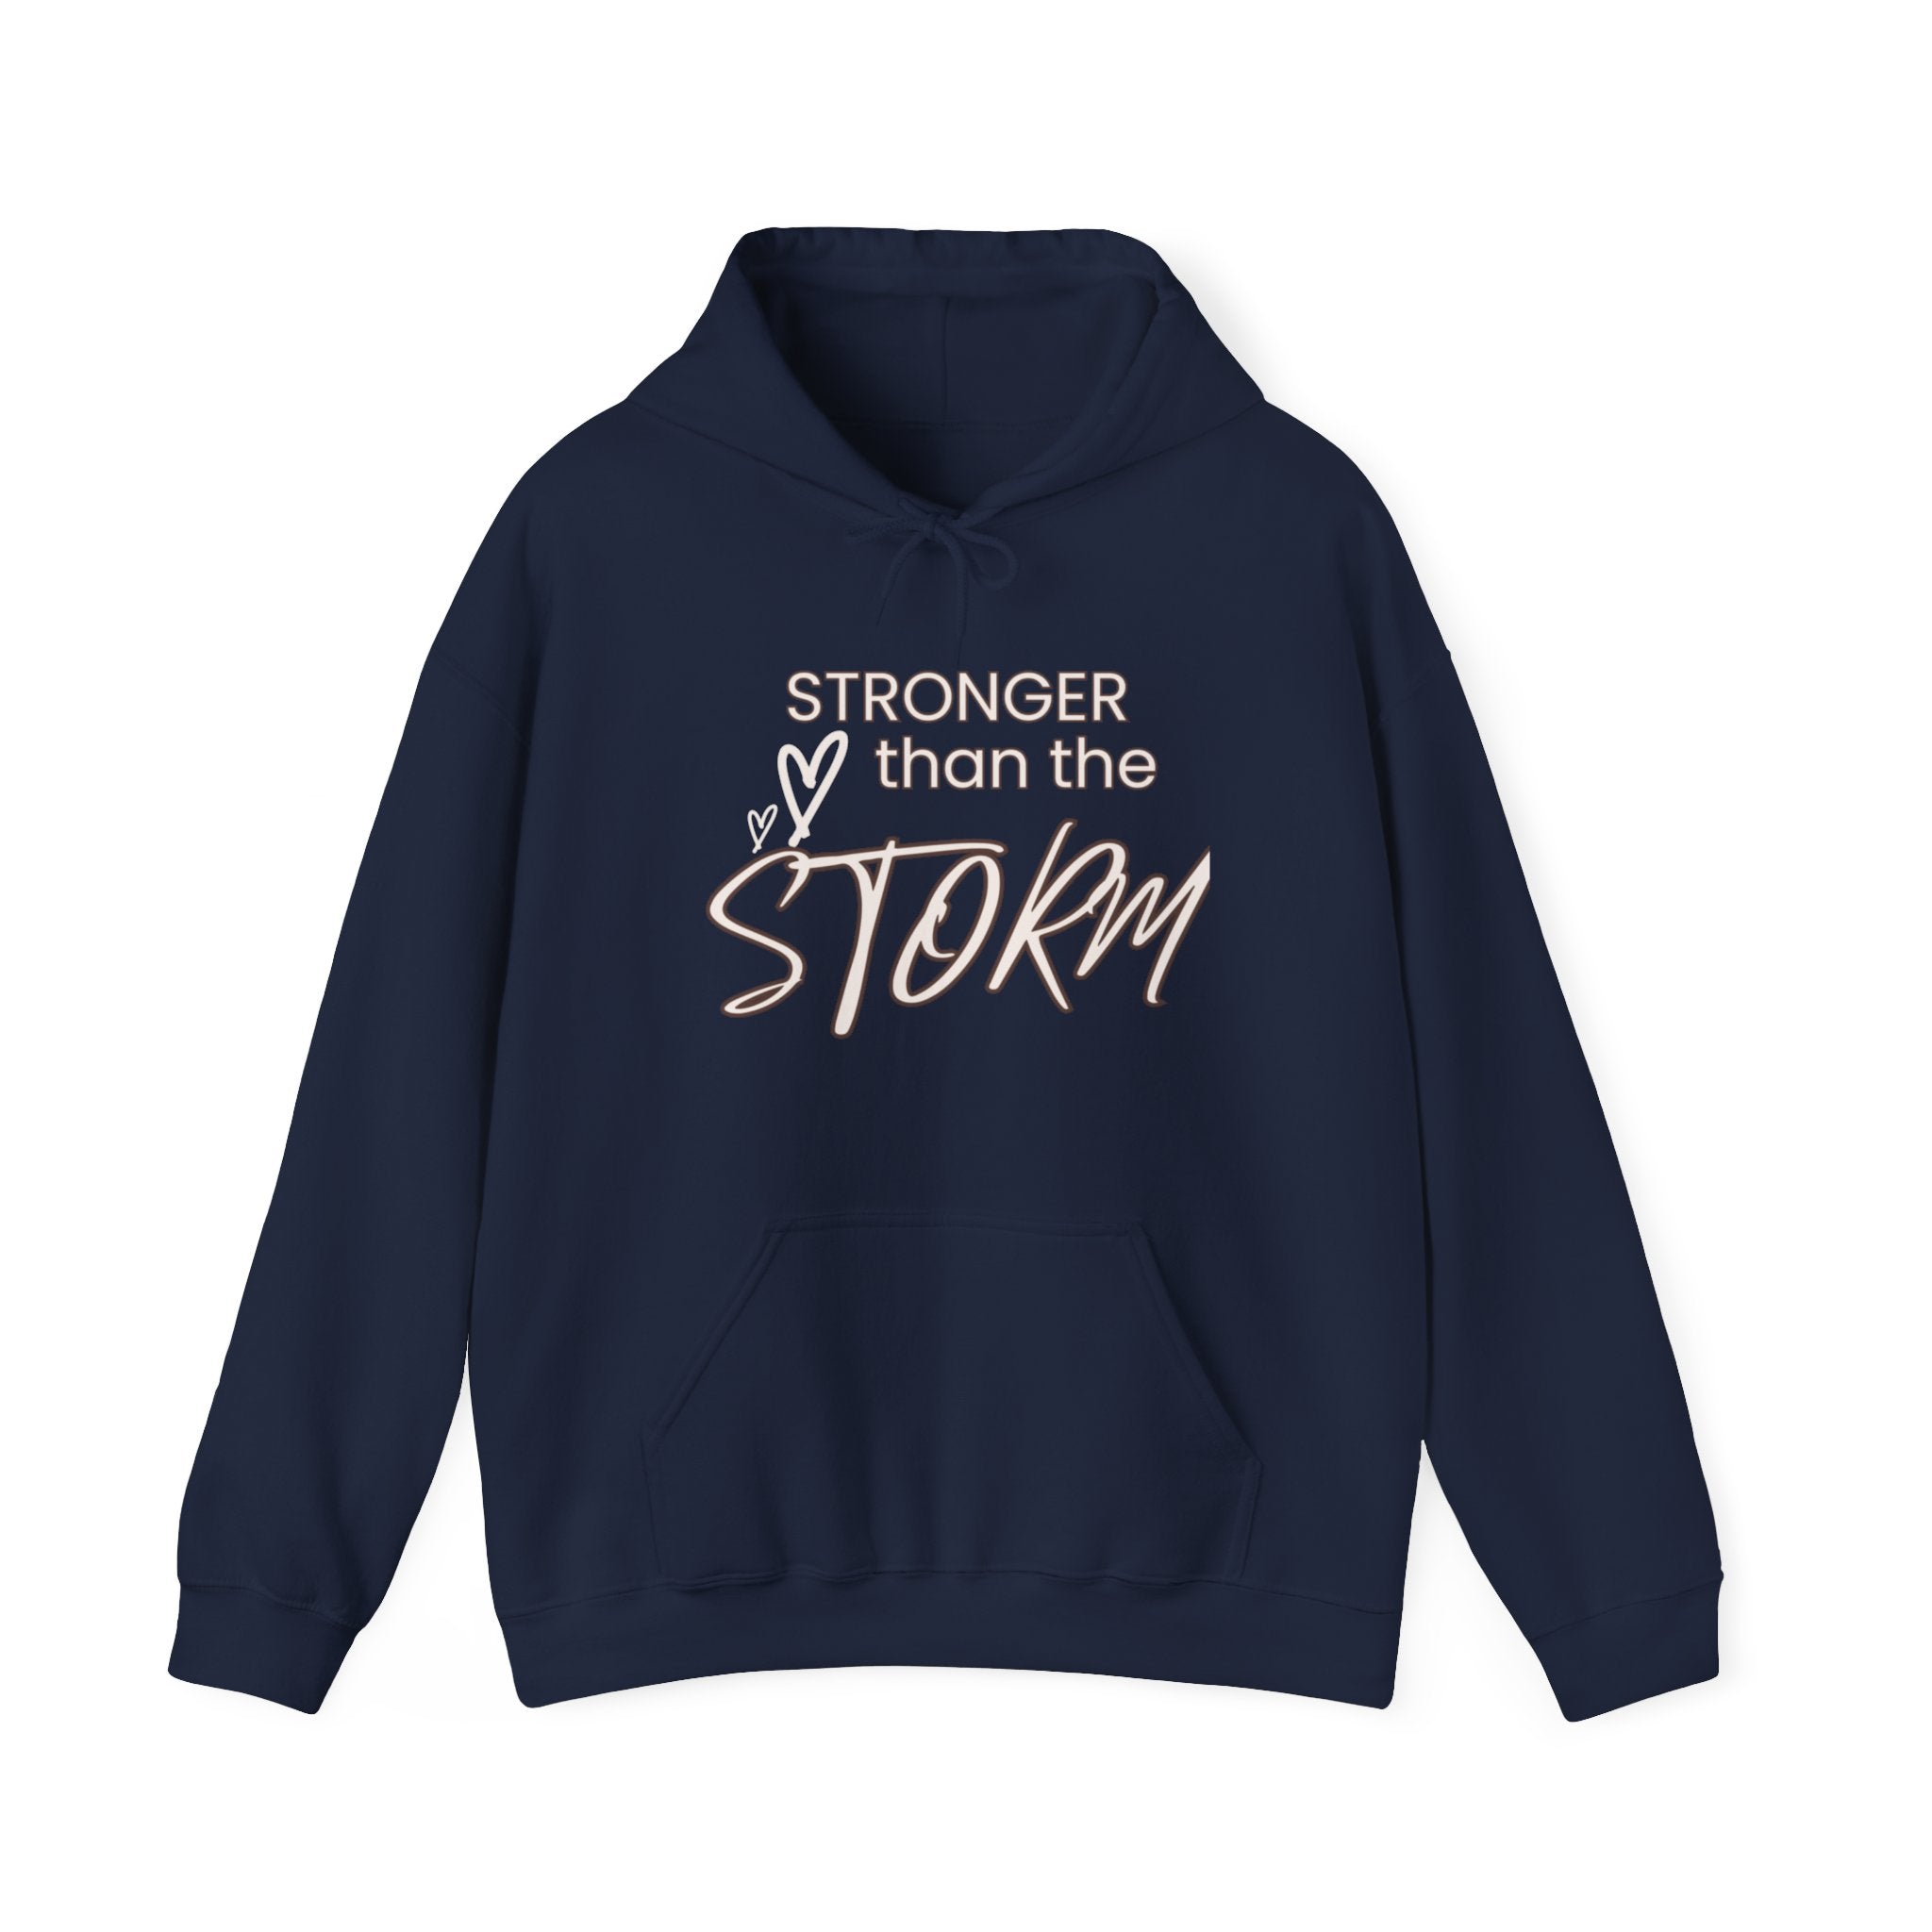 "Stronger Than The Storm" Motivational Hoodie